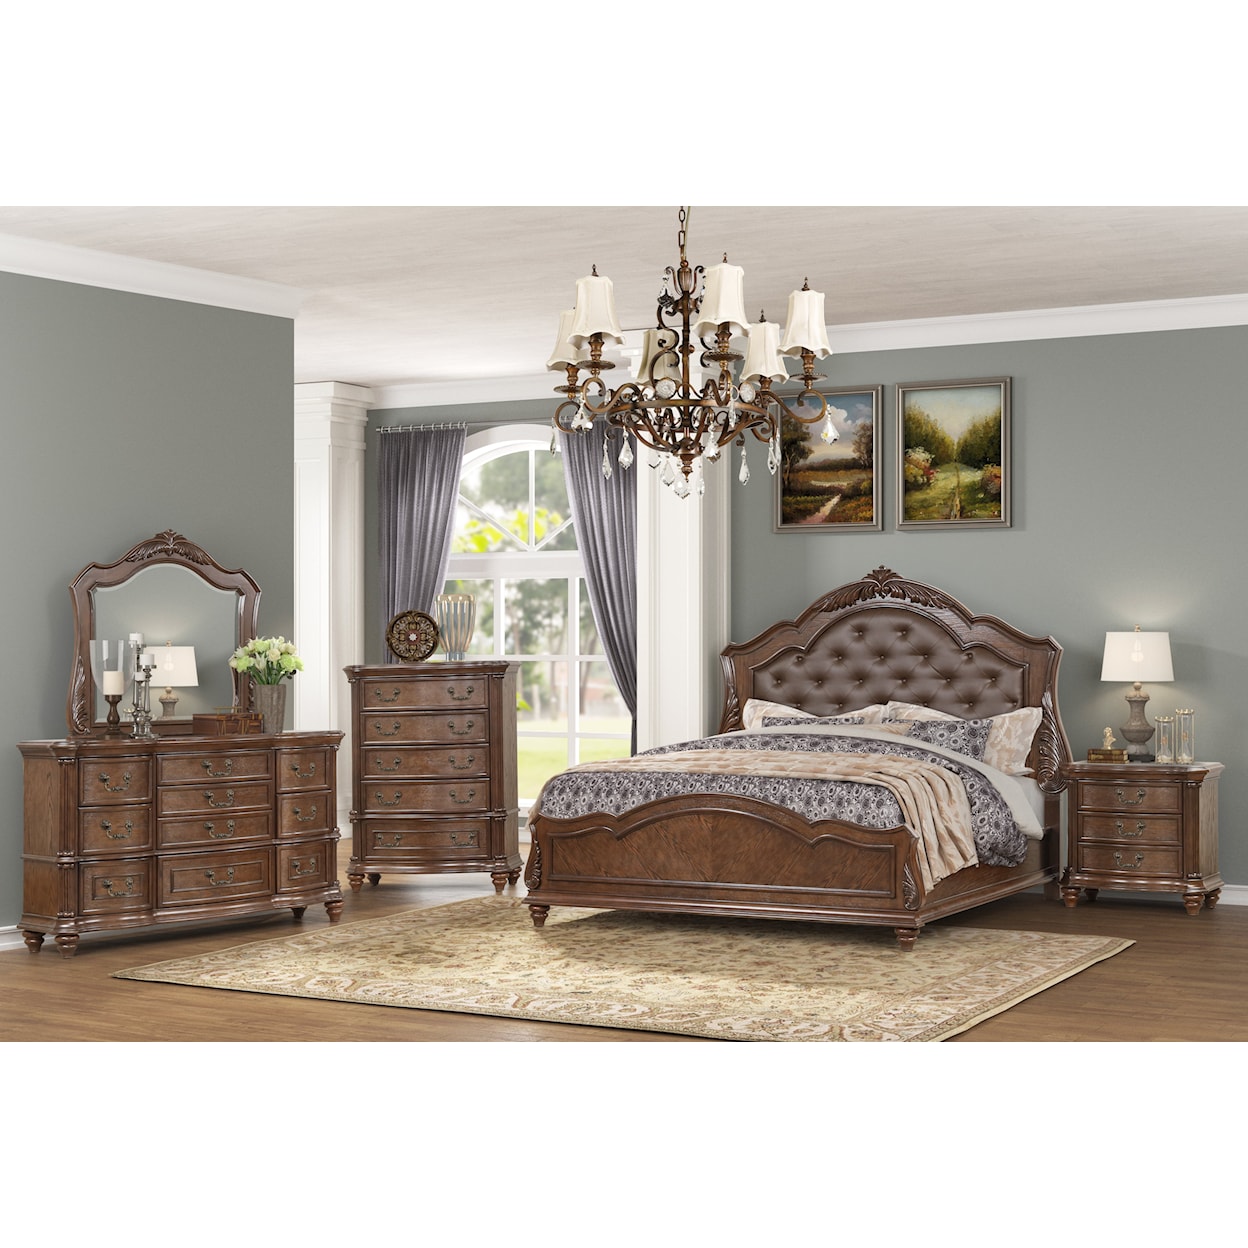 New Classic Furniture Roma King Upholstered Bed